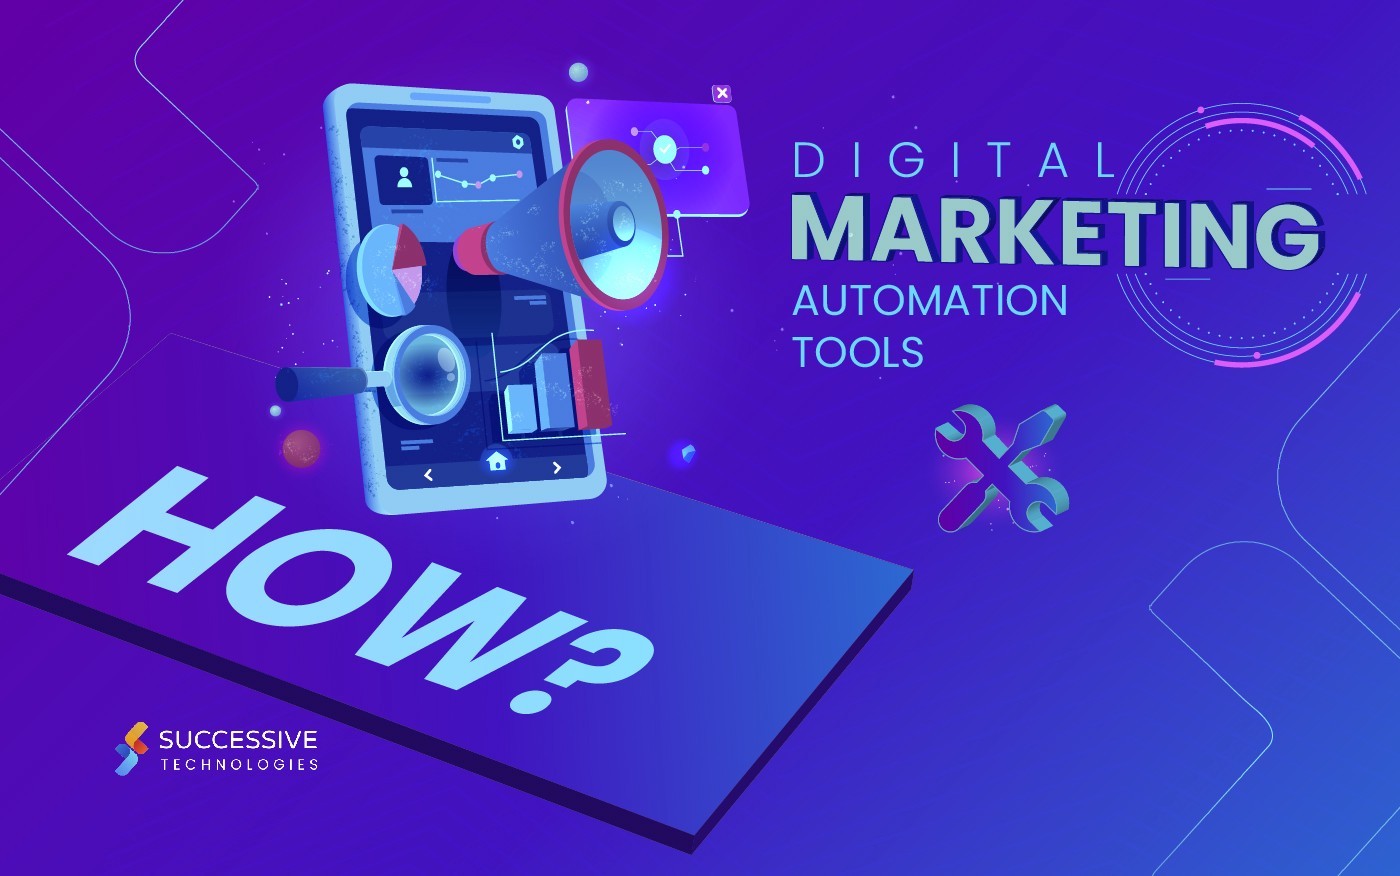 How Automation Tools Can Help in Digital Marketing?